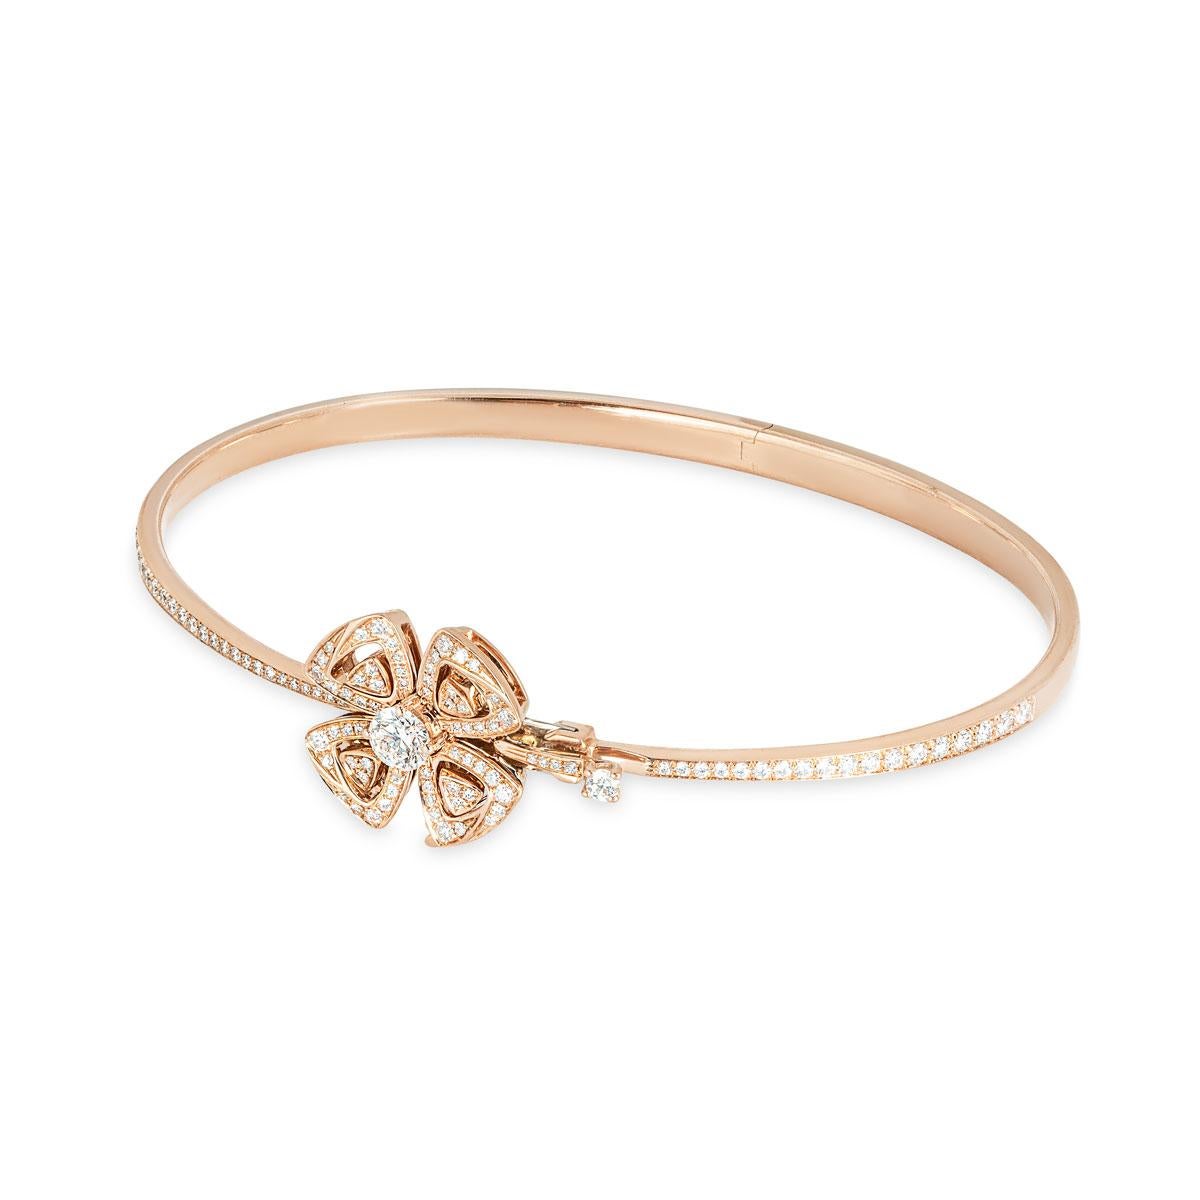 An alluring 18k rose gold diamond bracelet by Bvlgari from the Fiorever collection. The bracelet coils around the wrist and finishes with a flower motif, set to the center with a single round brilliant cut diamond with an approximate weight of